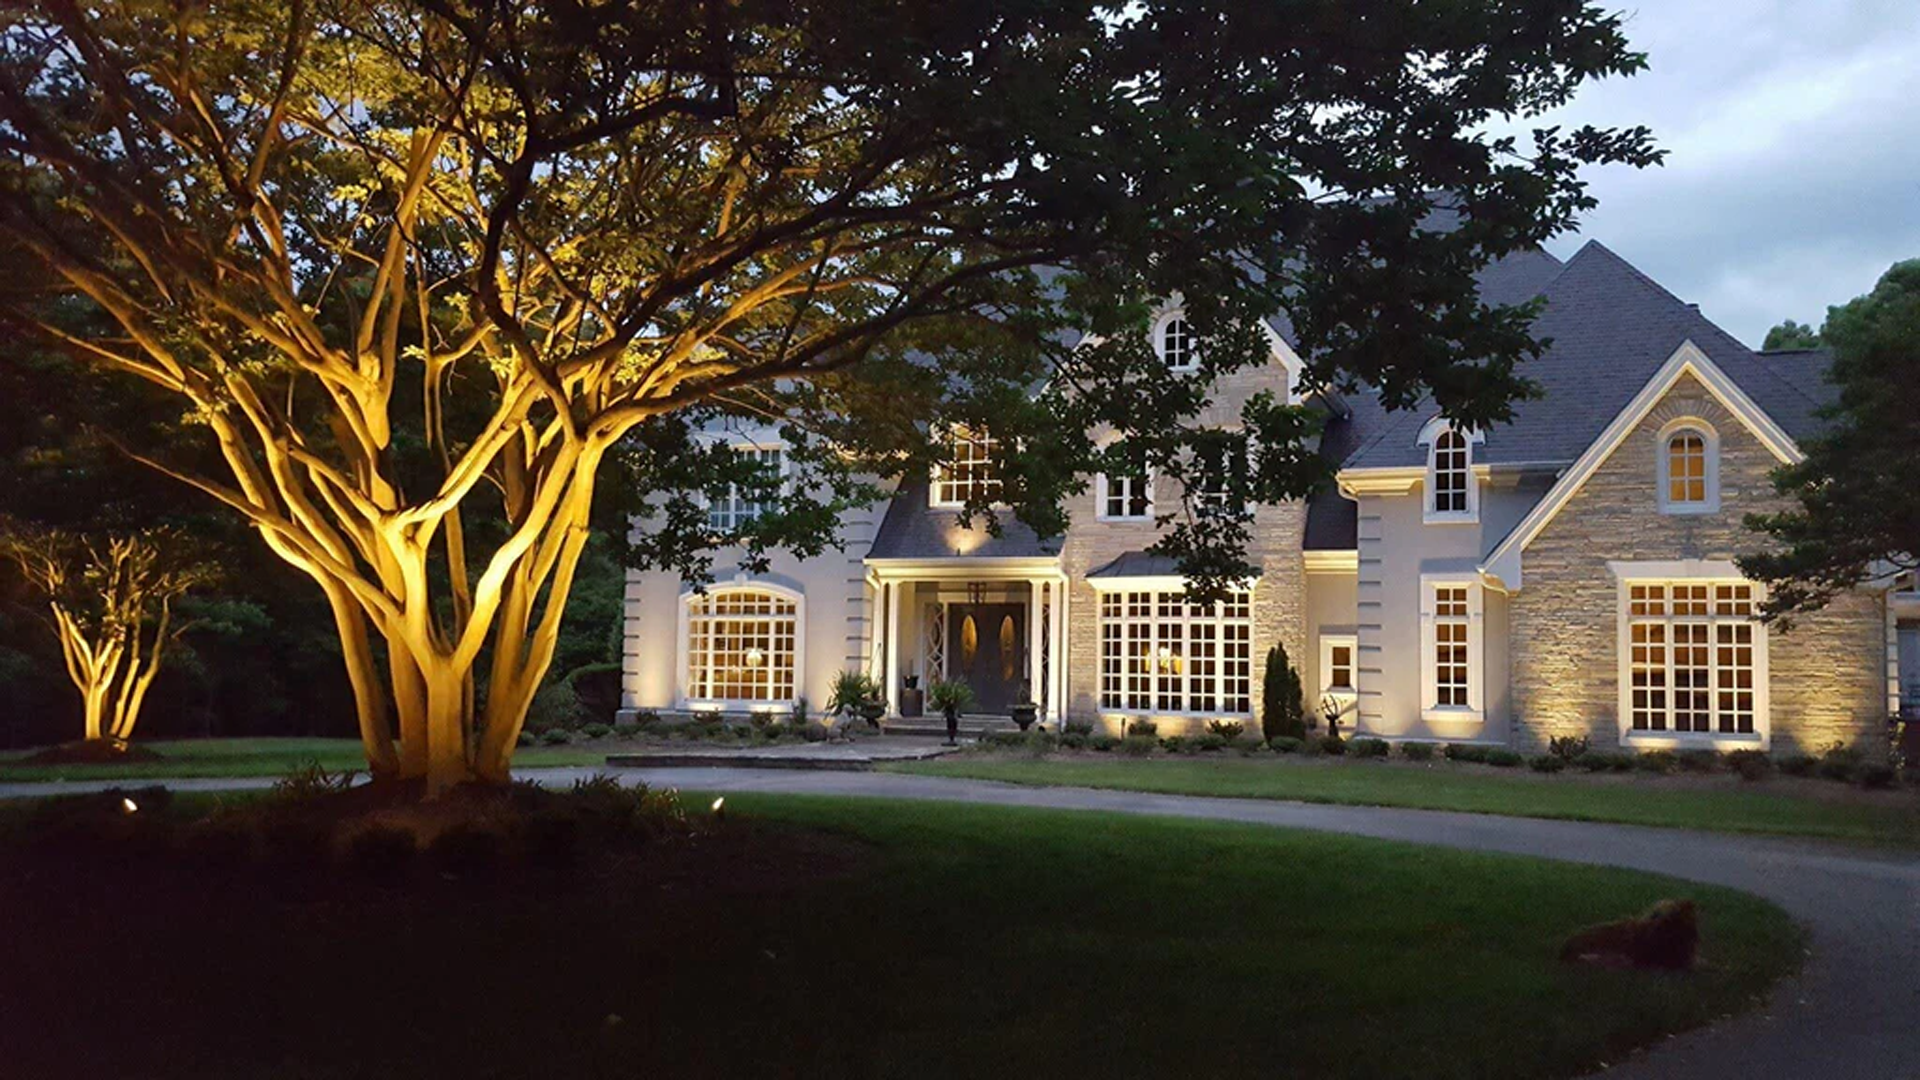 How Can Proper Lighting Transform the Front of Your House? Top 5 Lighting Tips and Mistakes to Avoid